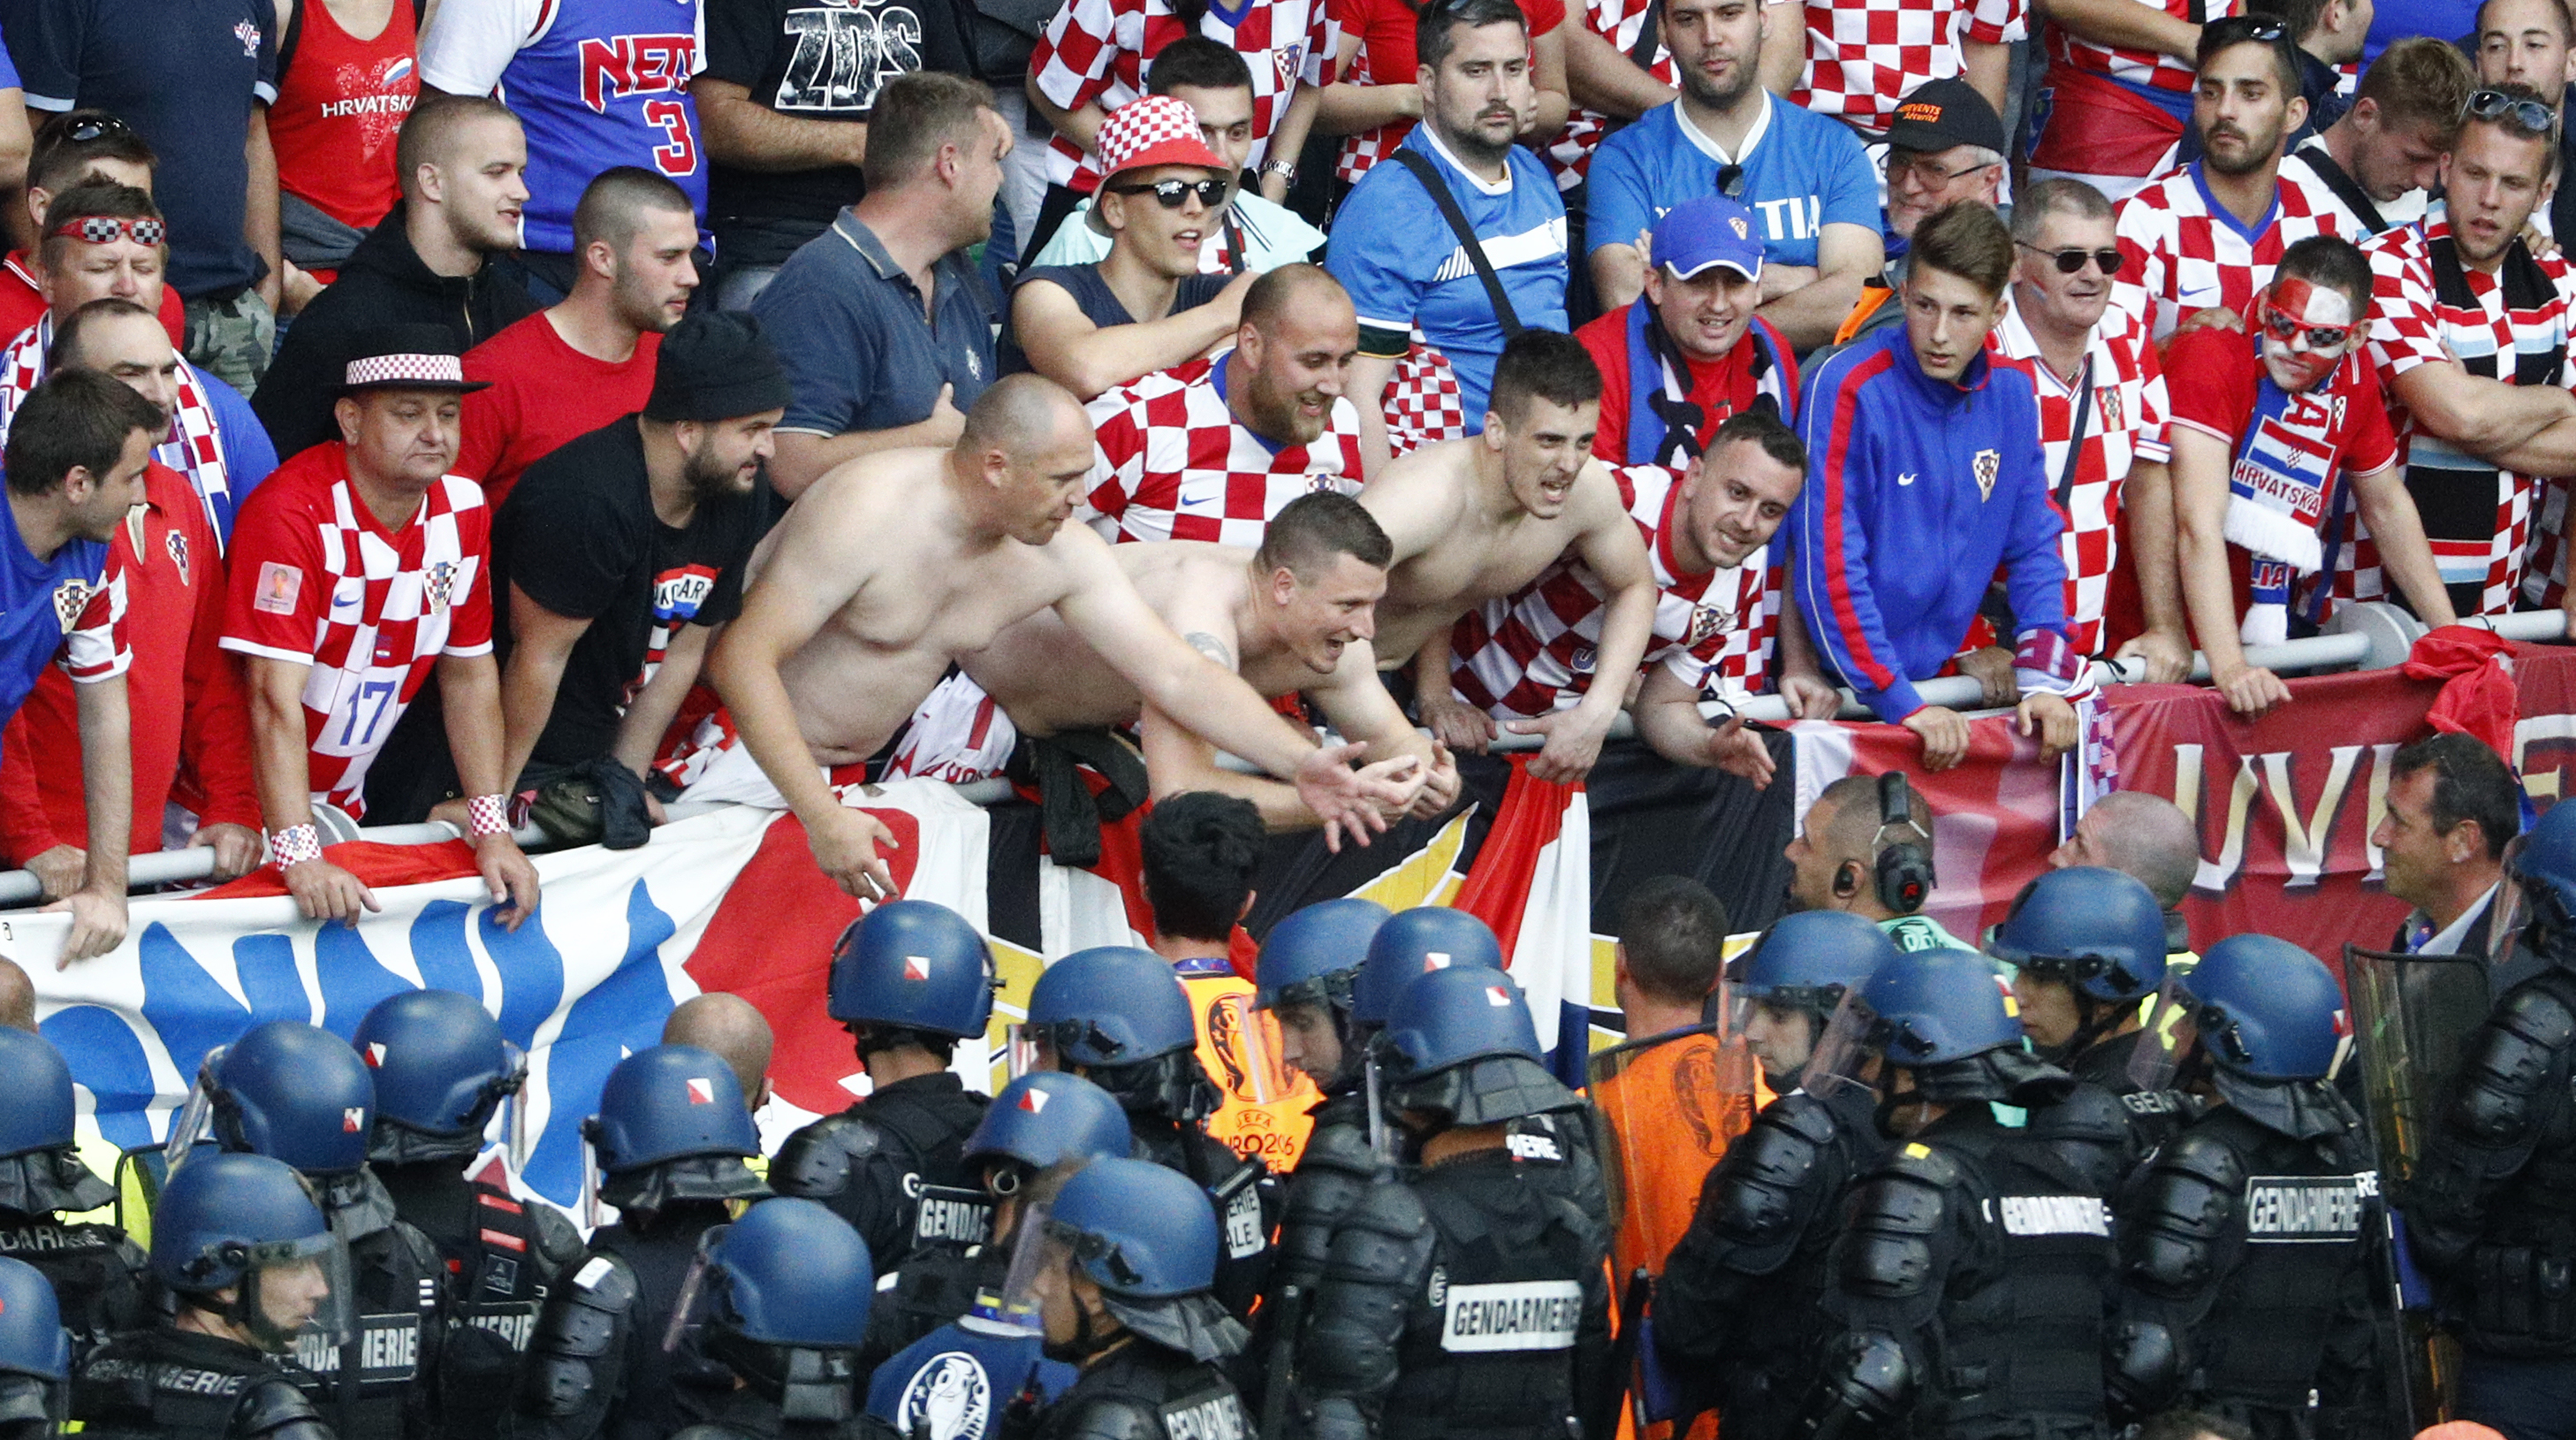 Football Soccer - Czech Republic v Croatia - EURO 2016 - Group D - Stade Geoffroy-Guichard, Saint-�tienne, France - 17/6/16 Croatia fans are watched by police REUTERS/Max Rossi Livepic